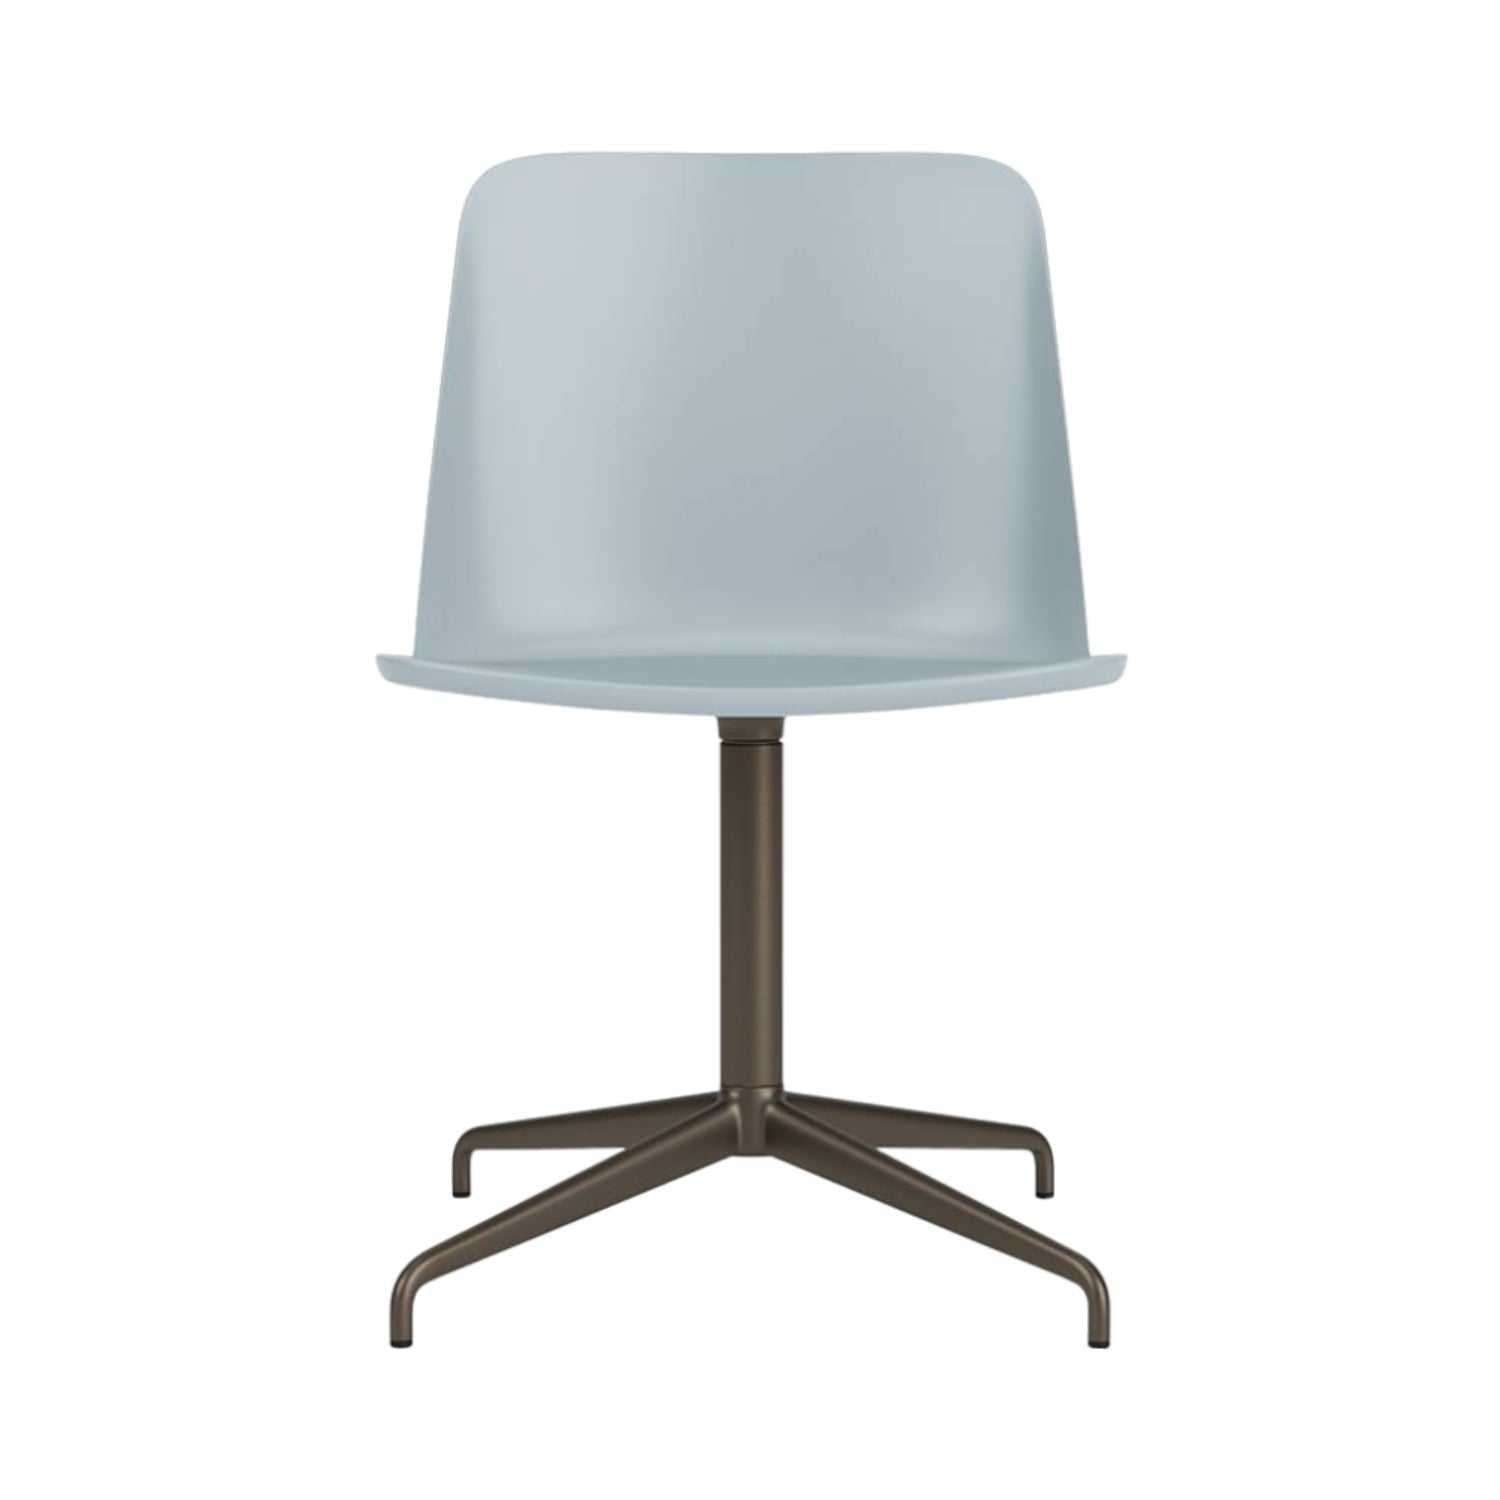 Rely Chair HW16: Light Blue + Bronzed